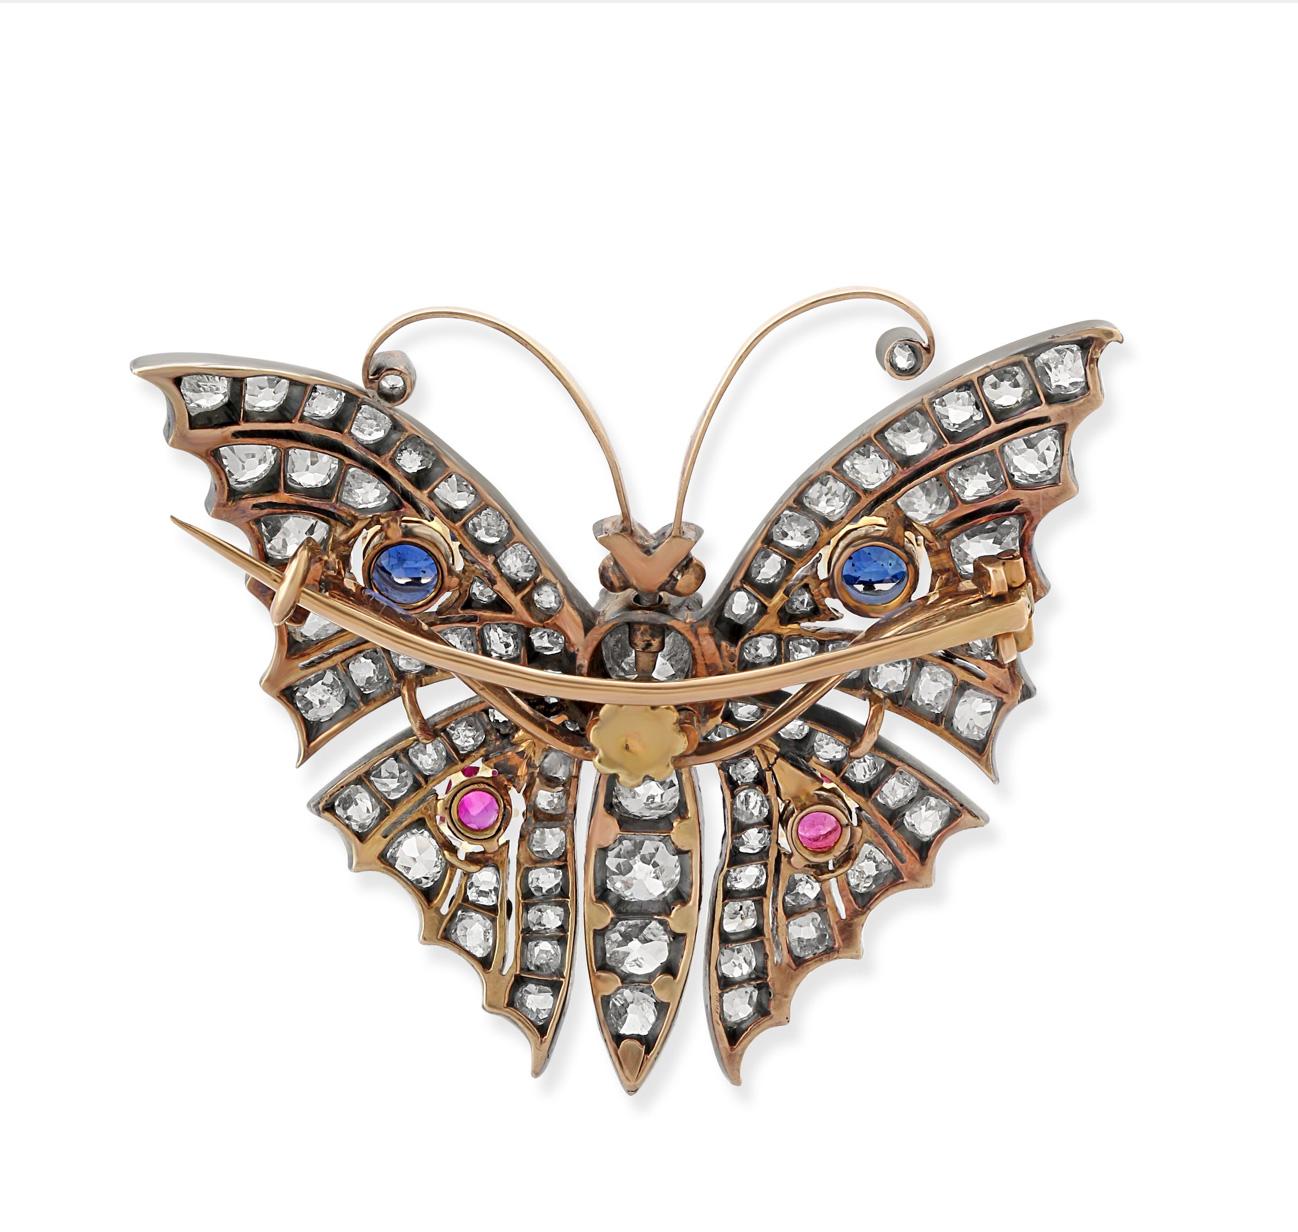 A Late 19th Century butterfly brooch. Set with approximately 7 carats of cushion shape, old and brilliant-cut diamonds with sapphire and rubies mounted in silver on top of gold. Length = 39mm.
